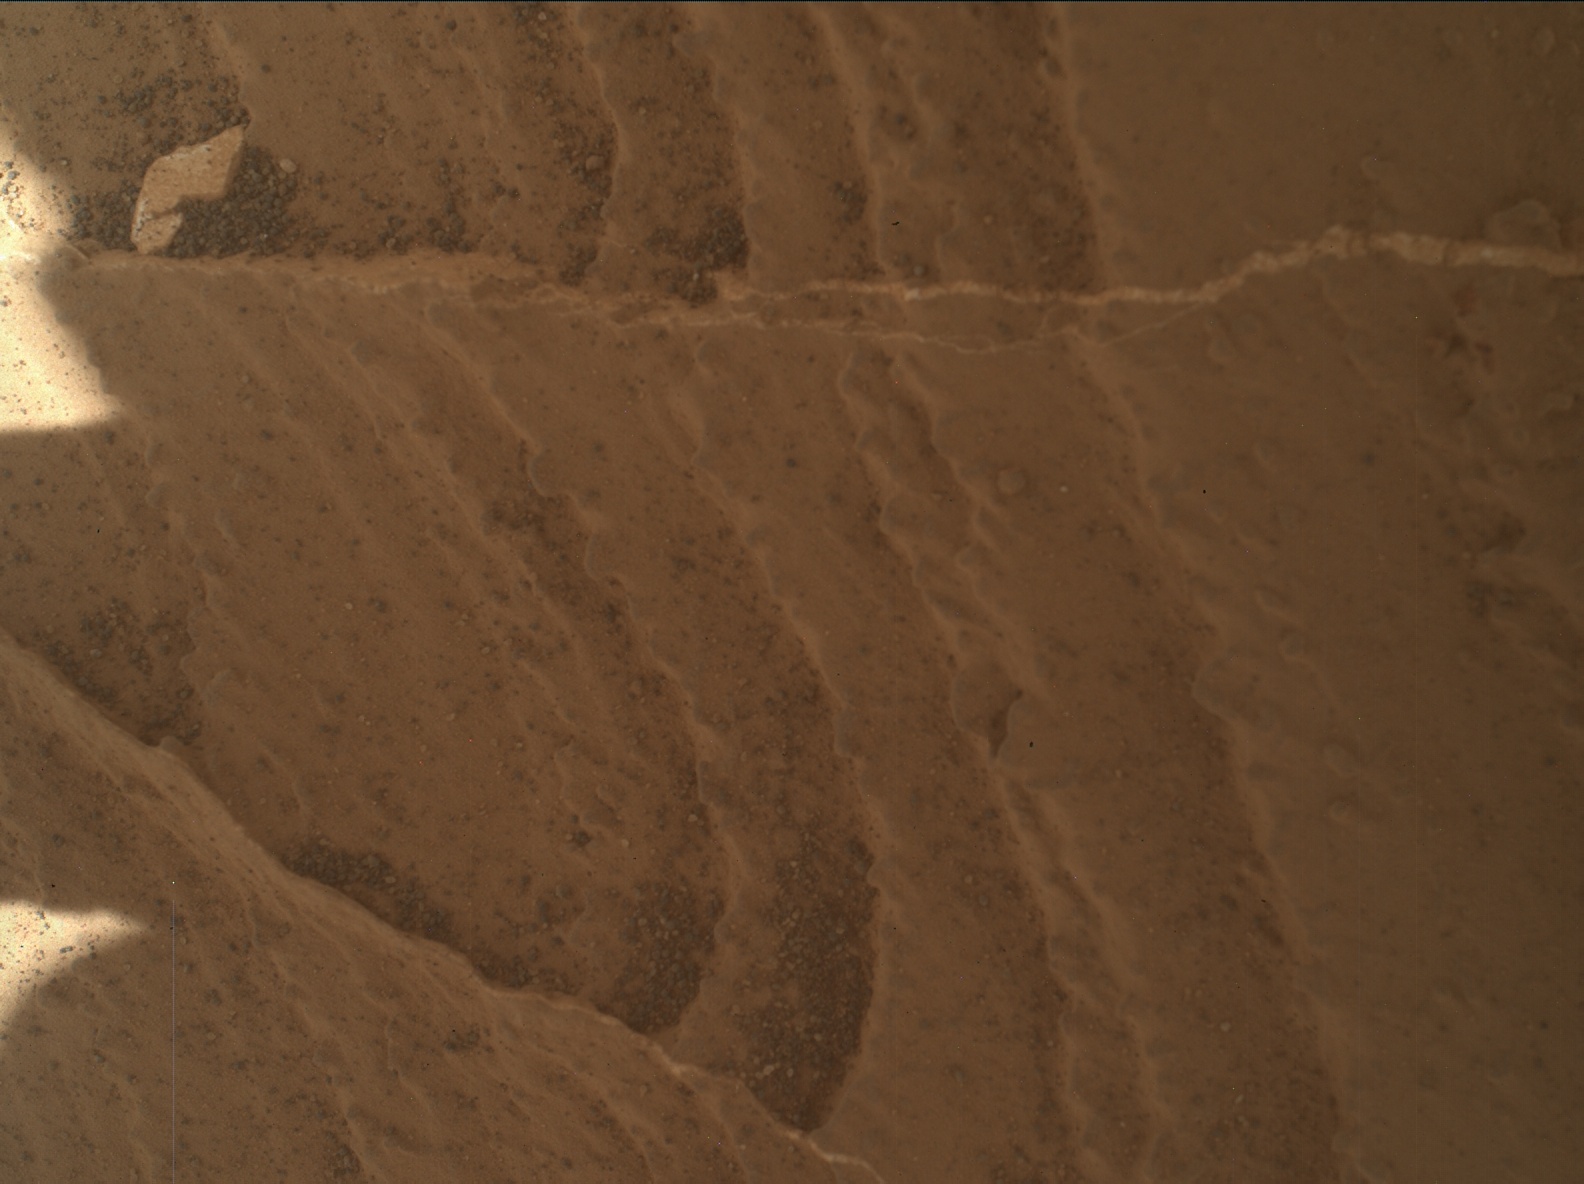 Nasa's Mars rover Curiosity acquired this image using its Mars Hand Lens Imager (MAHLI) on Sol 3279